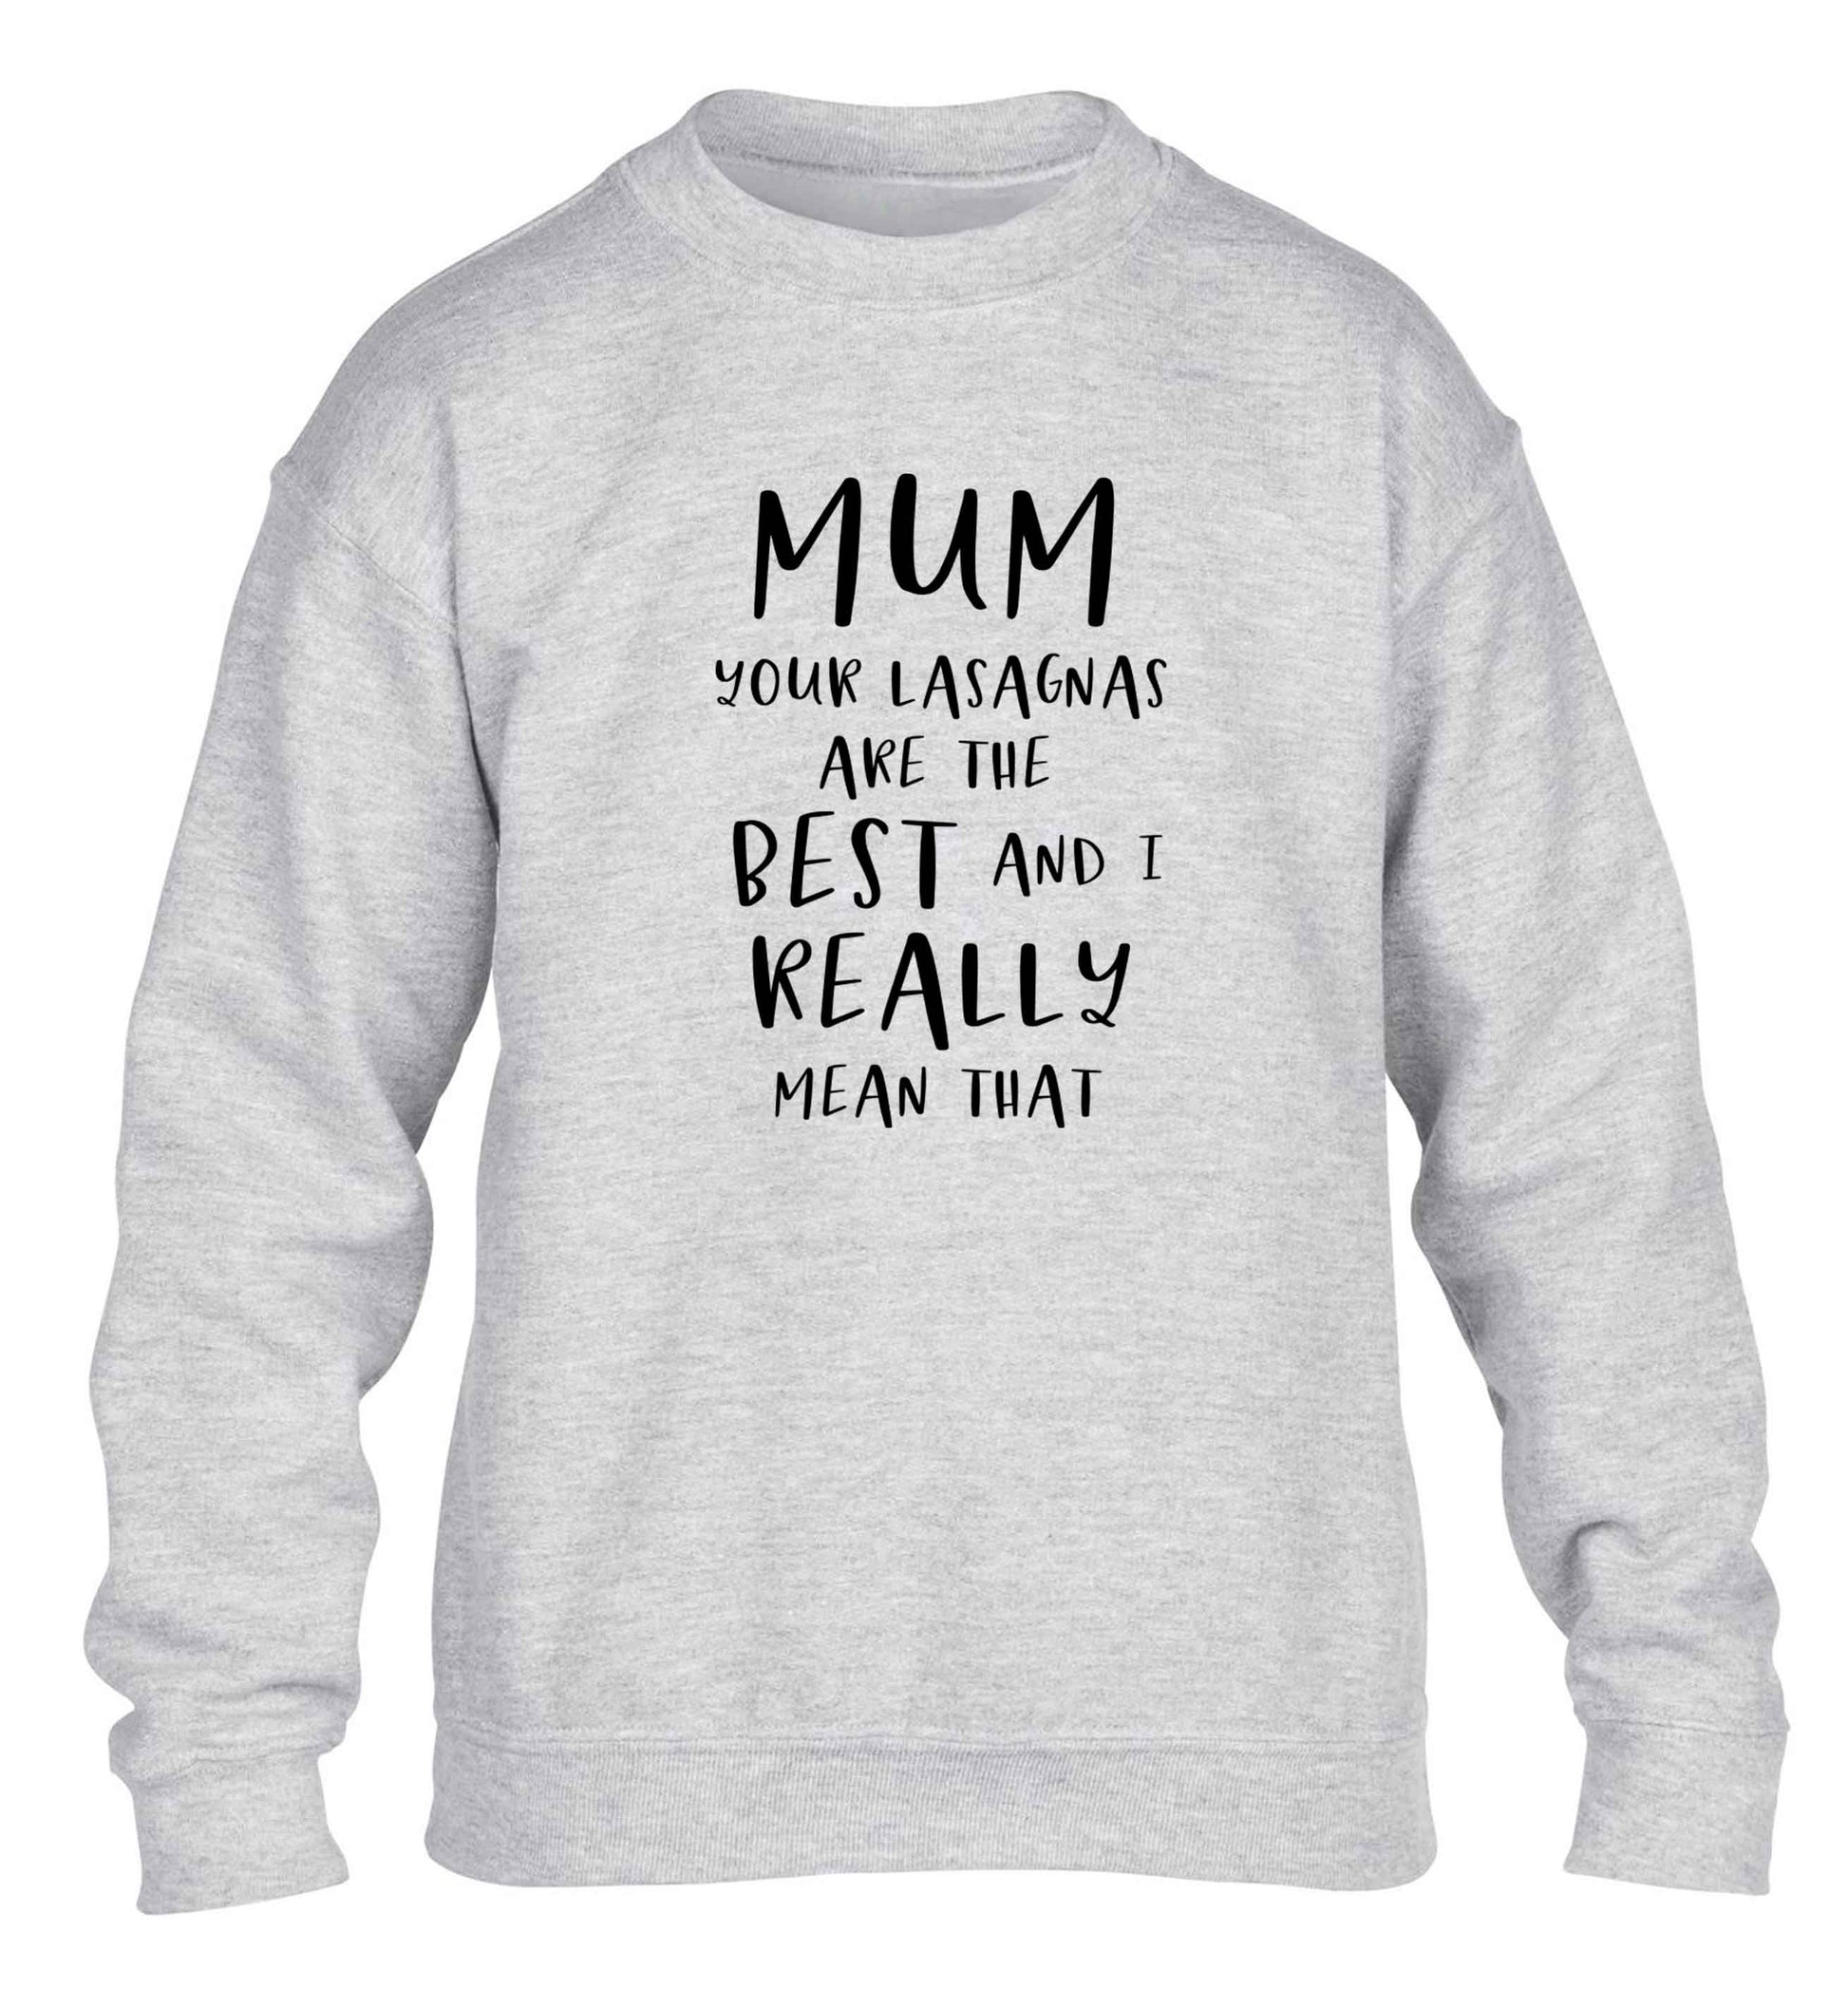 Funny gifts for your mum on mother's dayor her birthday! Mum your lasagnas are the best and I really mean that children's grey sweater 12-13 Years